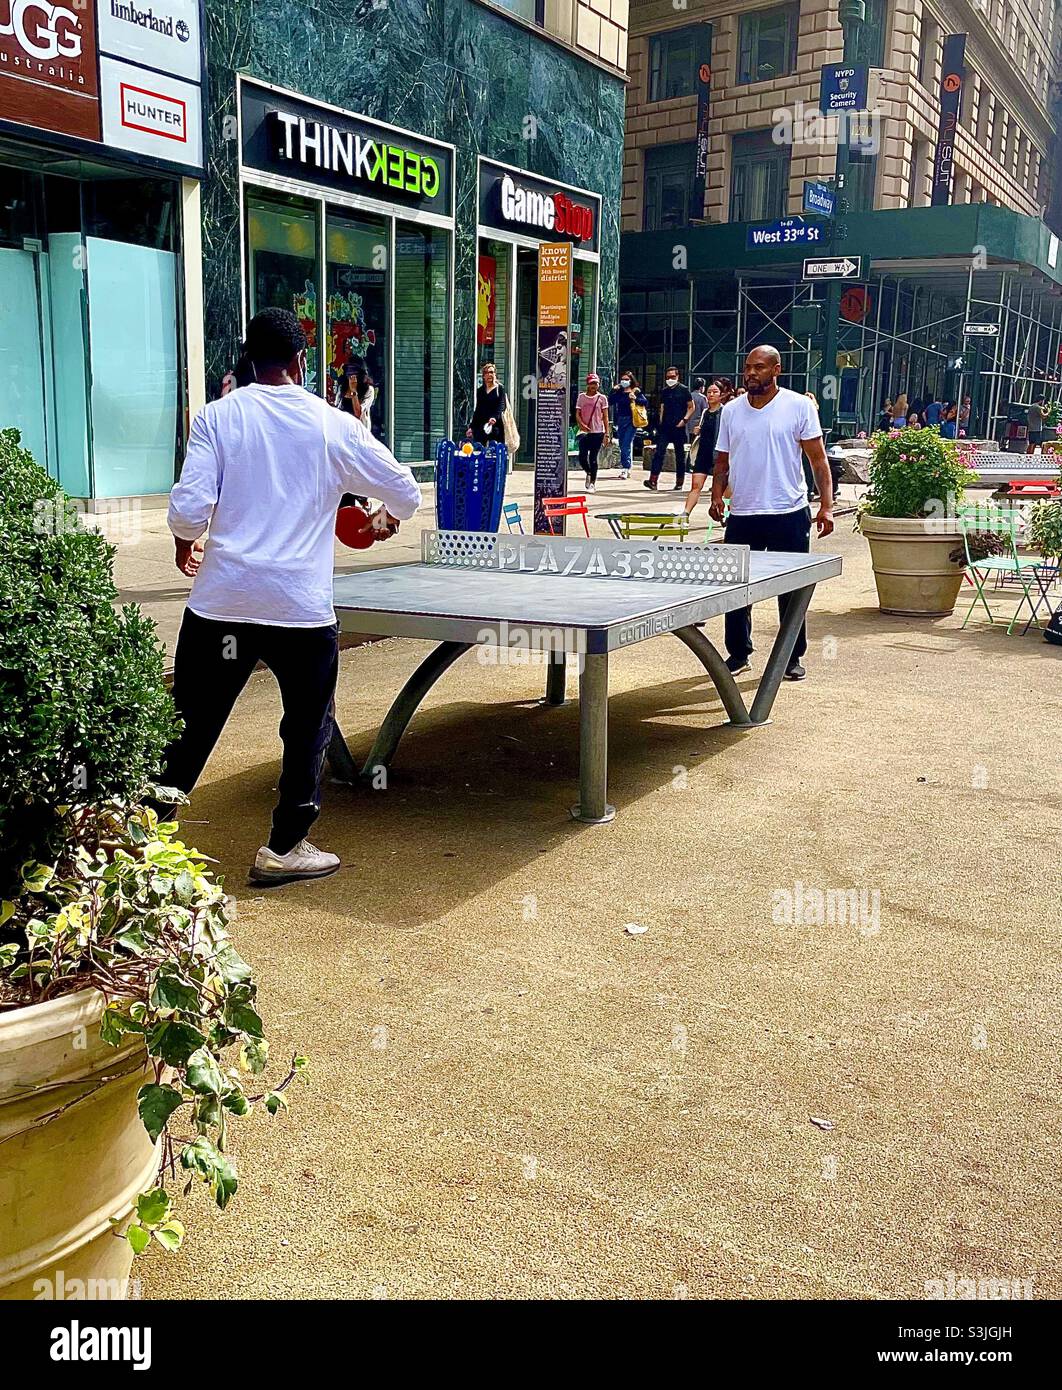 Ping pong a Greeley Square NYC USA Foto Stock